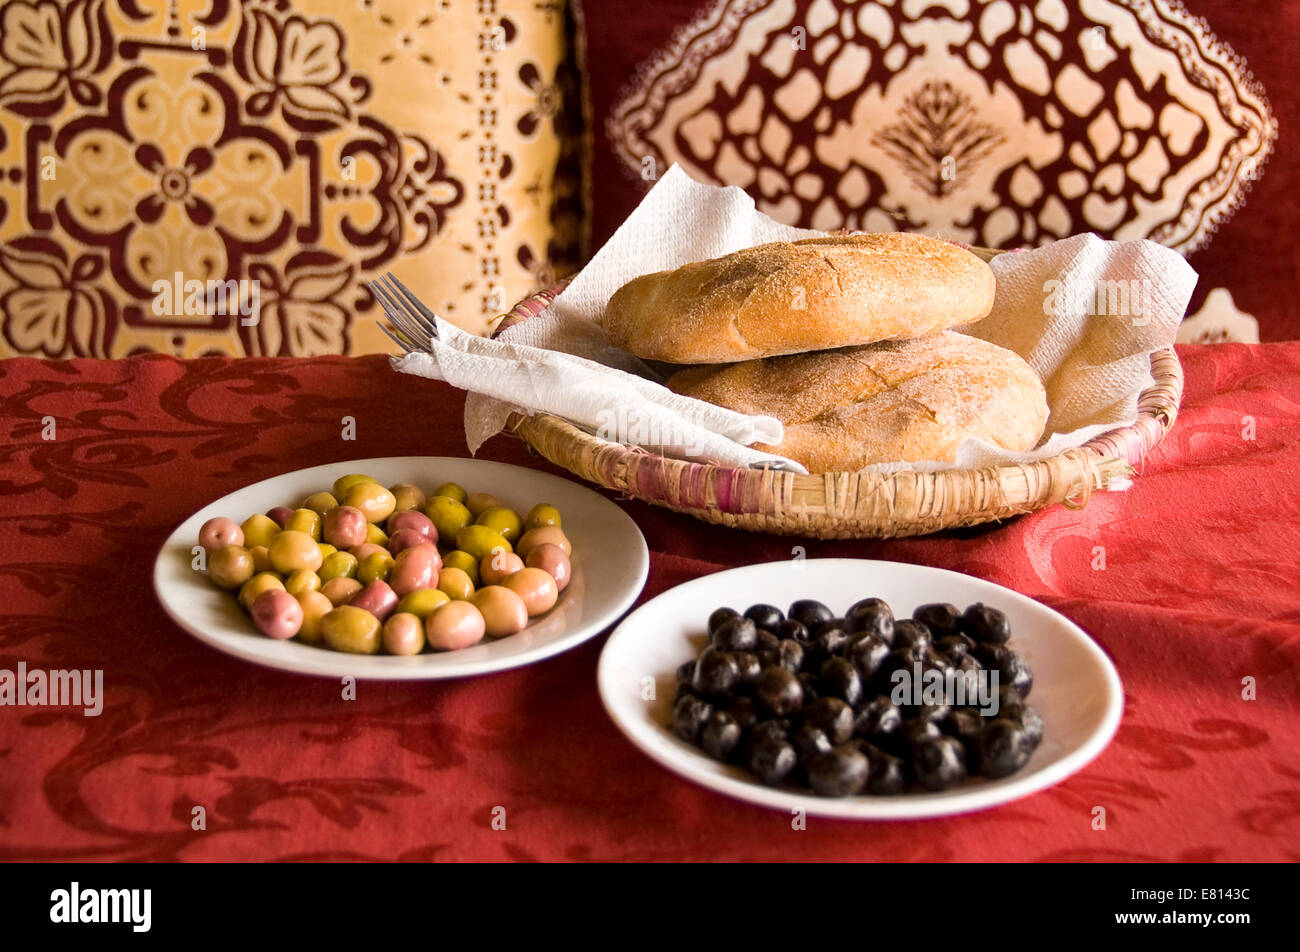 Horizontal close up of traditional Moroccan bread, khobz, served with green and black olives in Marrakech. Stock Photo